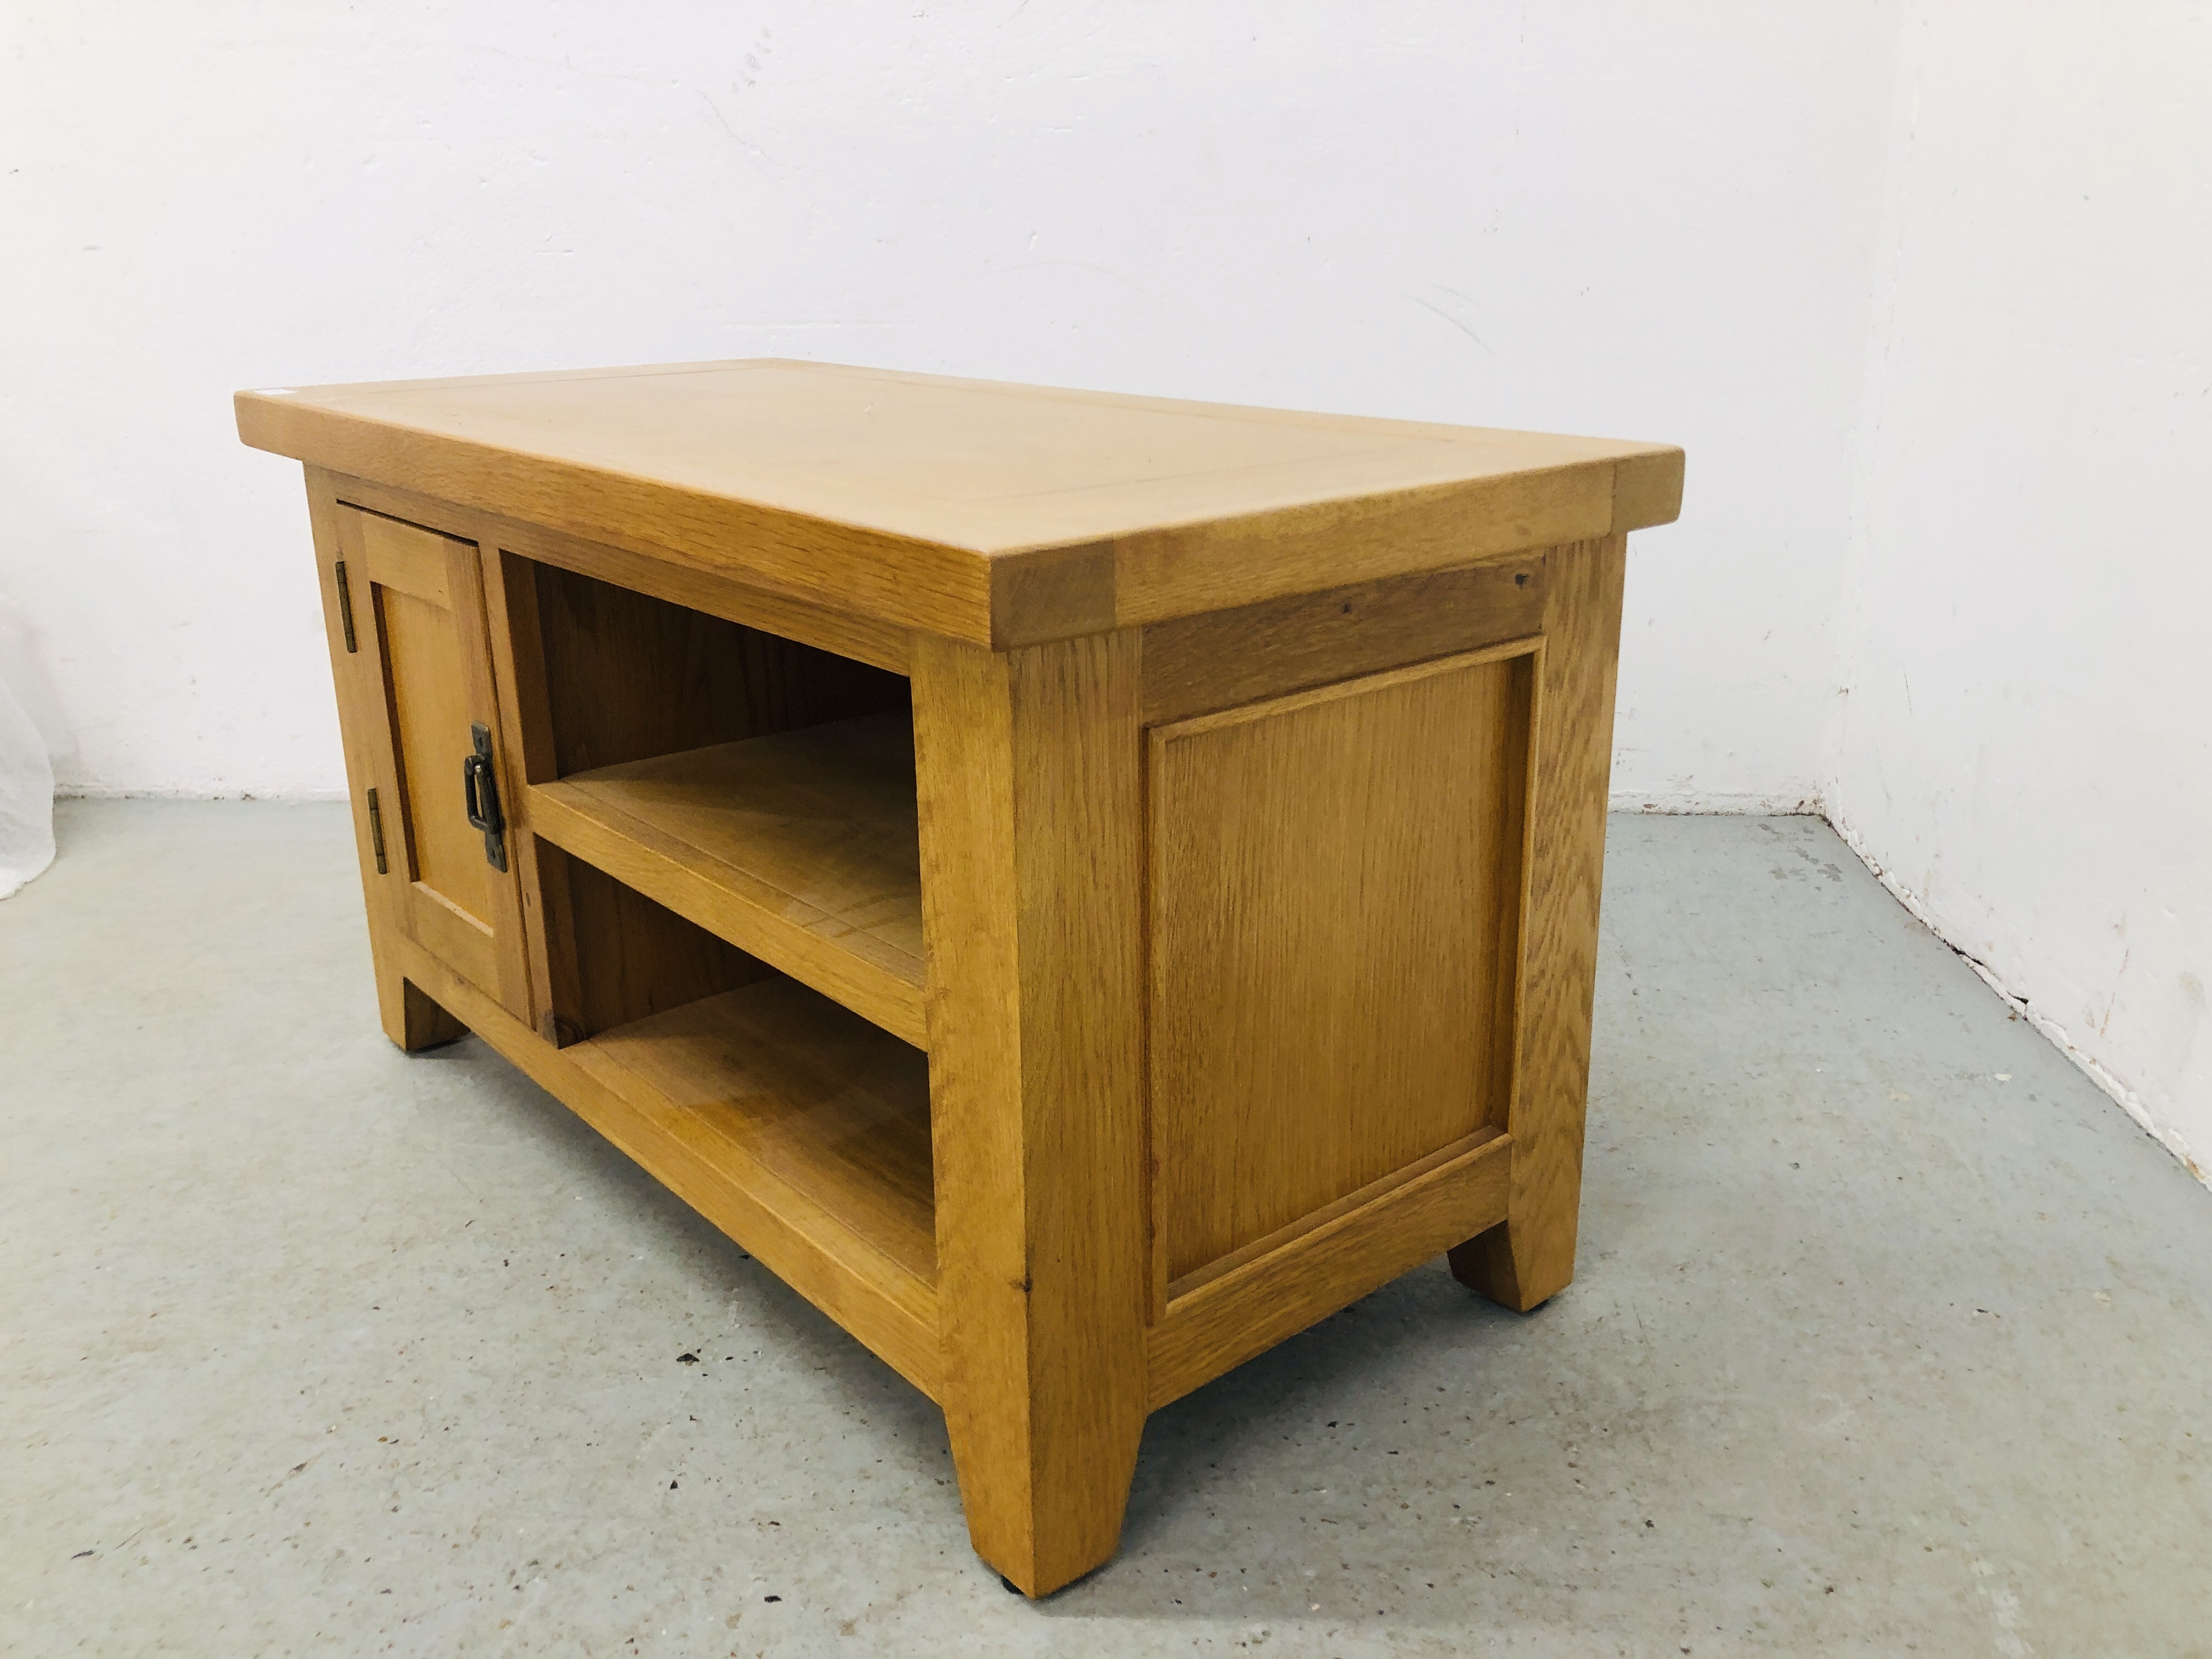 A MODERN SOLID OAK TV STAND WITH SINGLE DOOR W 90CM X D 44CM X H 51CM. - Image 3 of 5